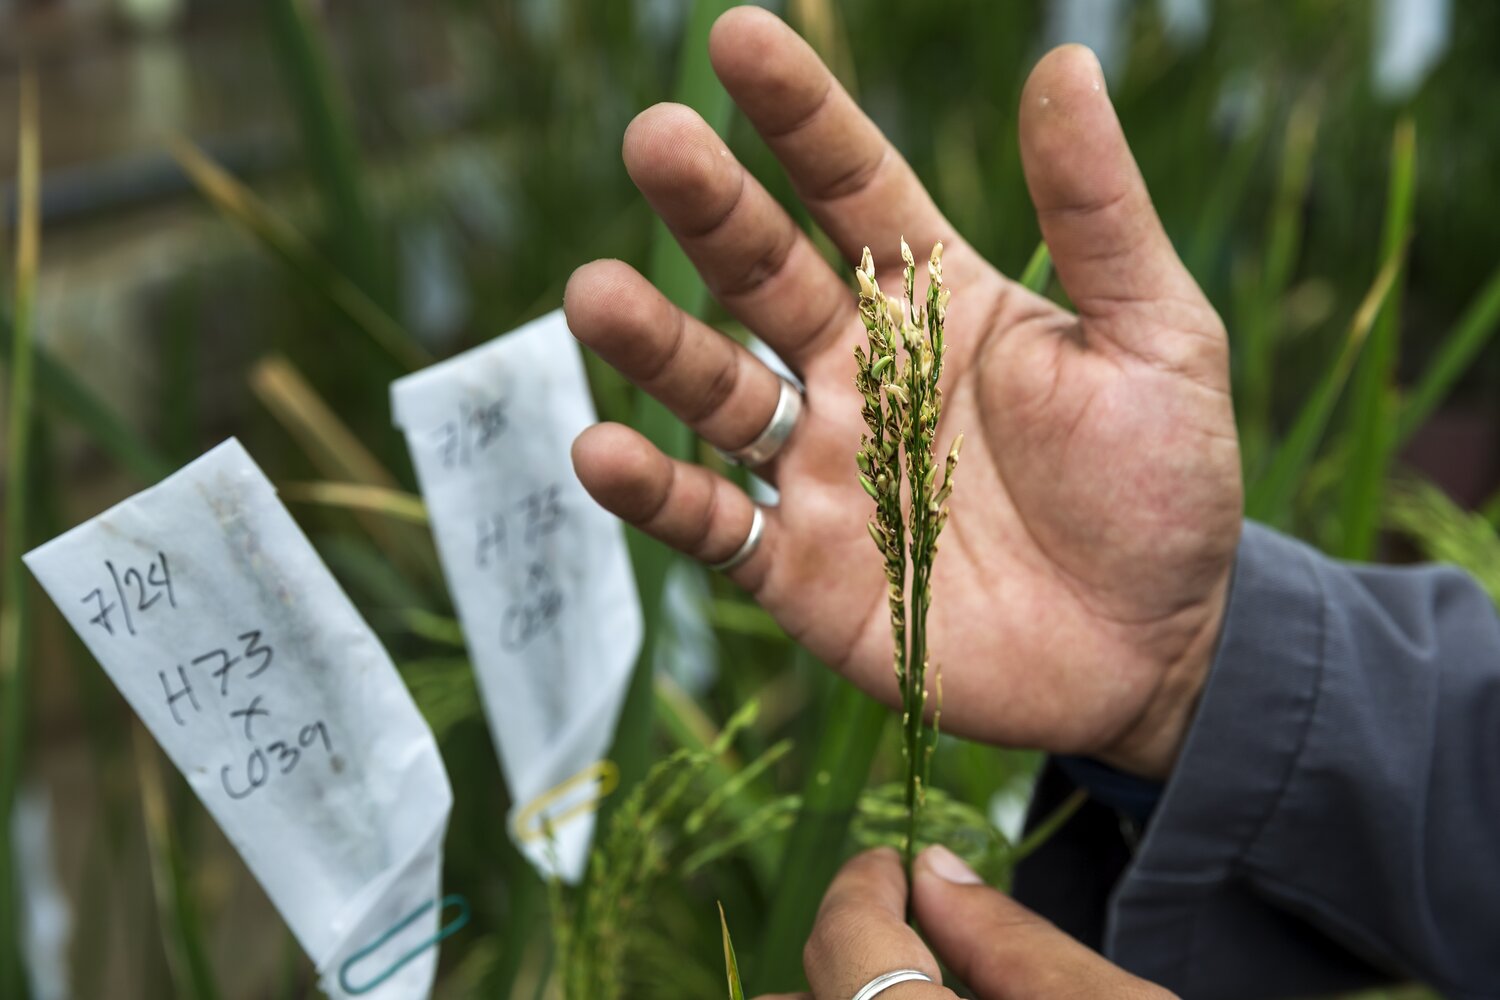 Rice held in front of hand